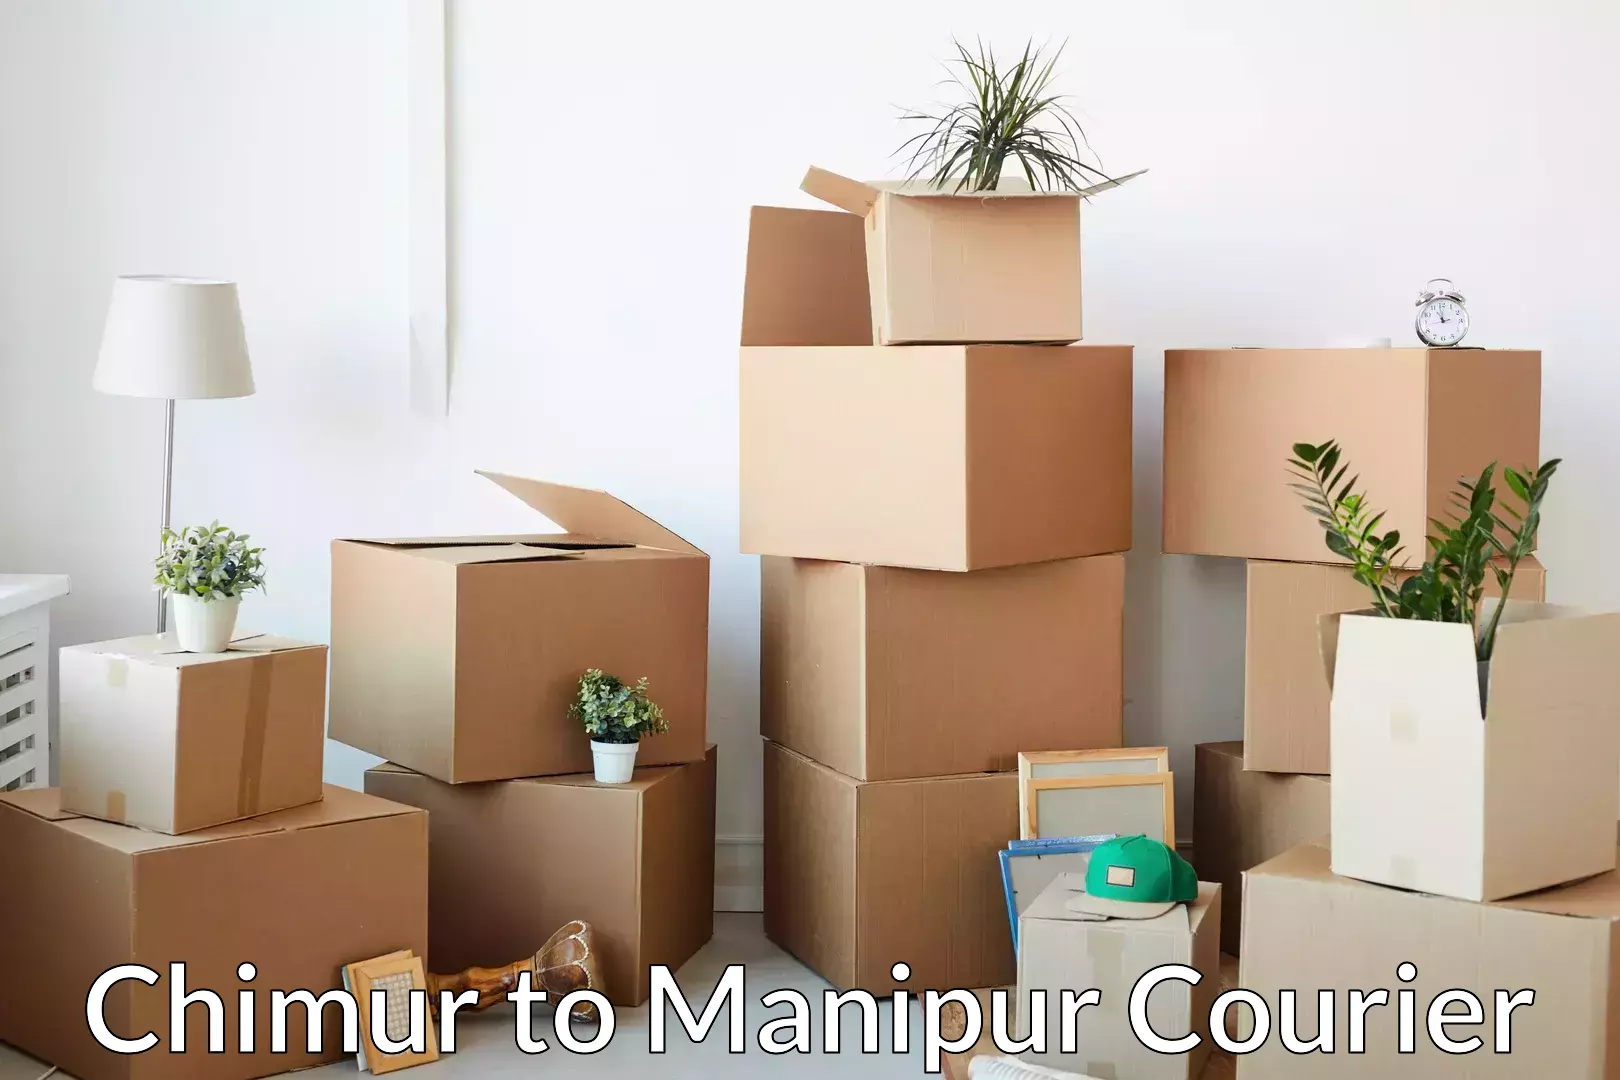 Furniture delivery service Chimur to Manipur